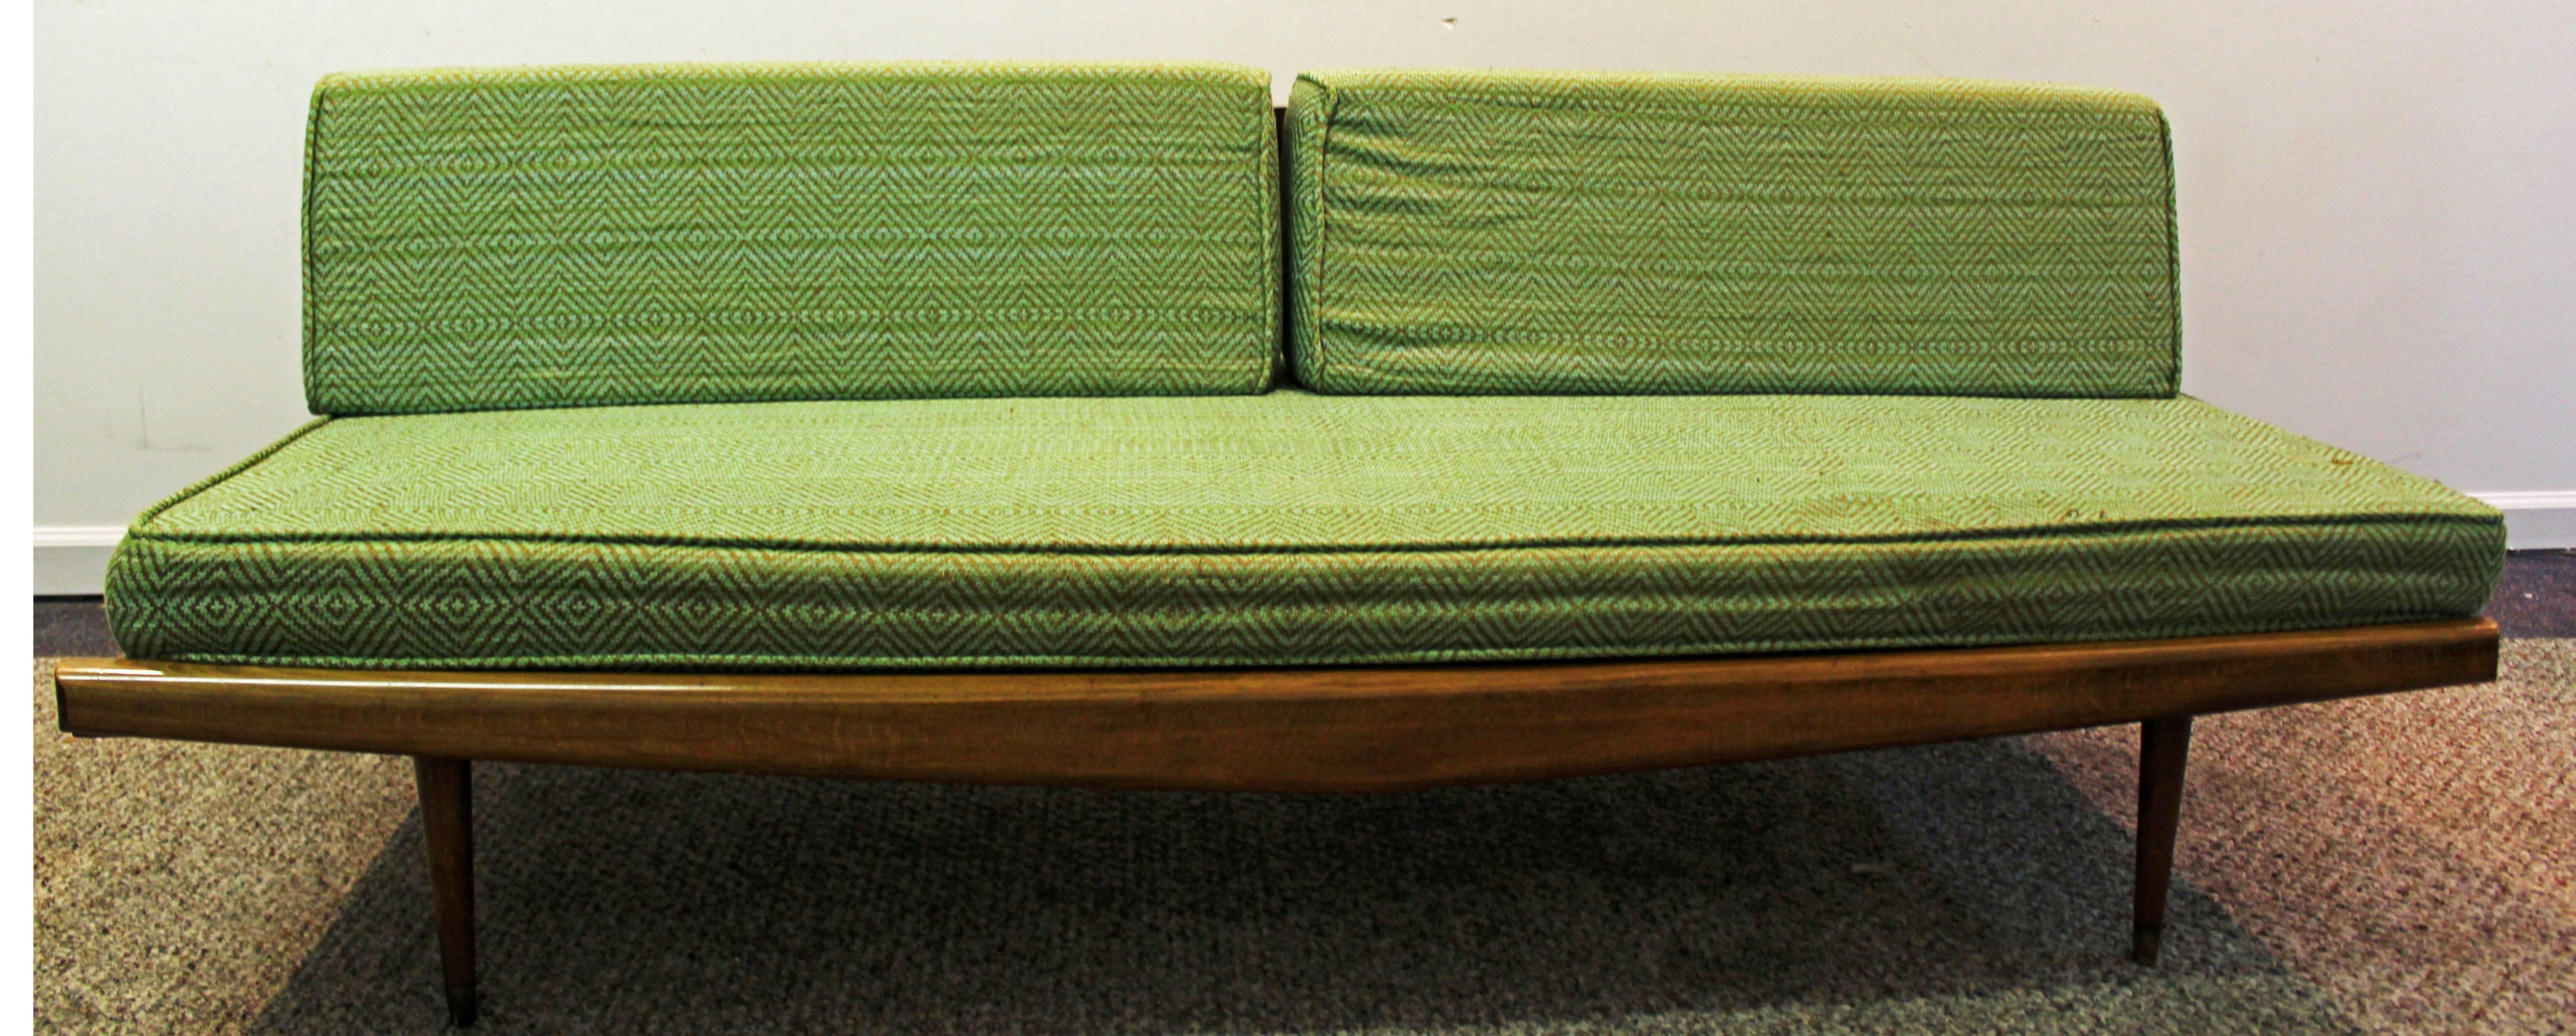 Offered is an original Adrian Pearsall sofa #992 with green upholstery and a wooden base.